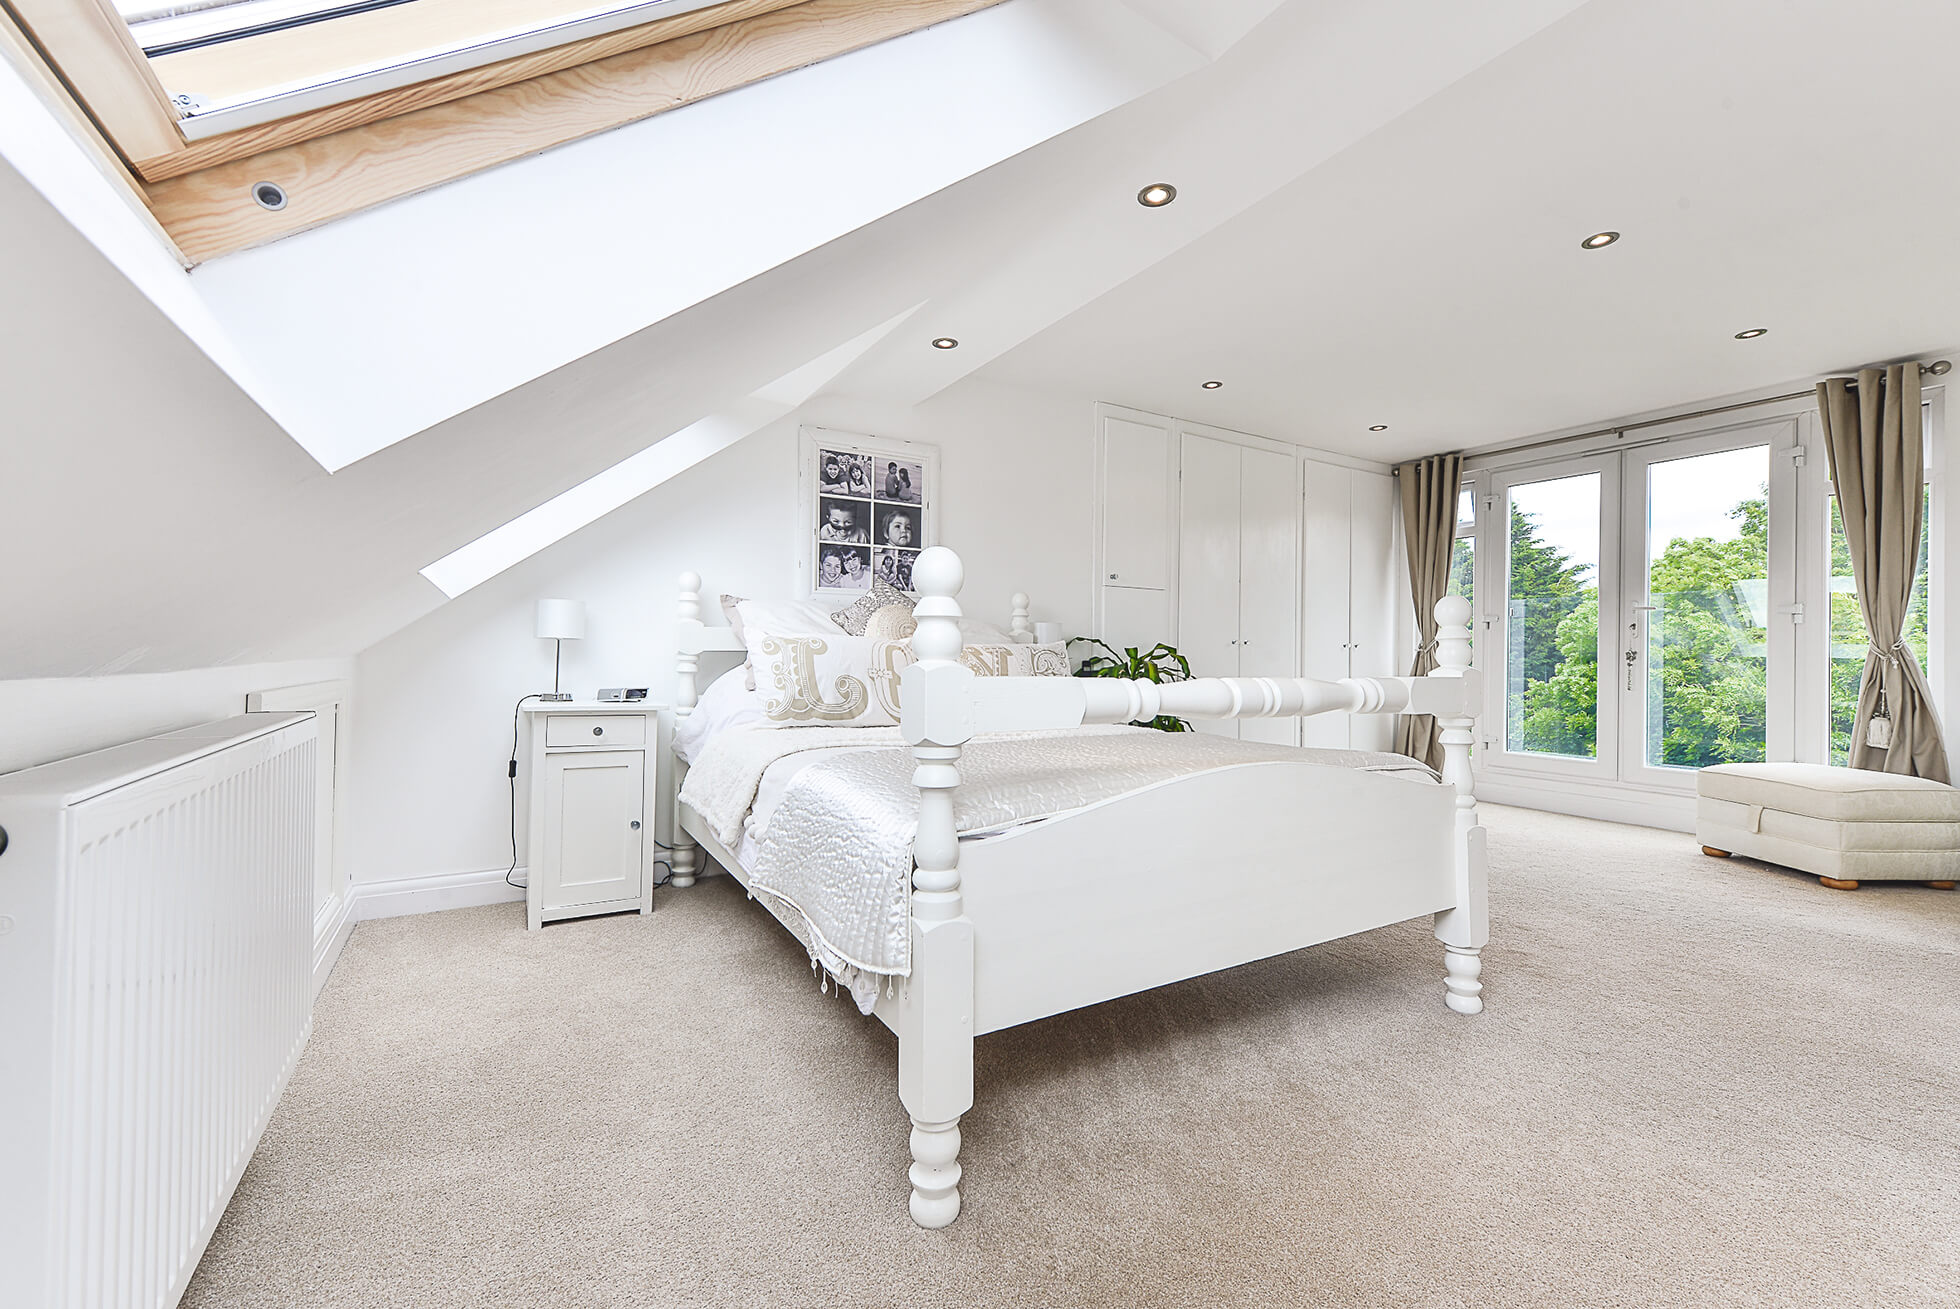 Do you have a question about converting your Loft in Chaulden? Here are the most popular questions asked by our clients.